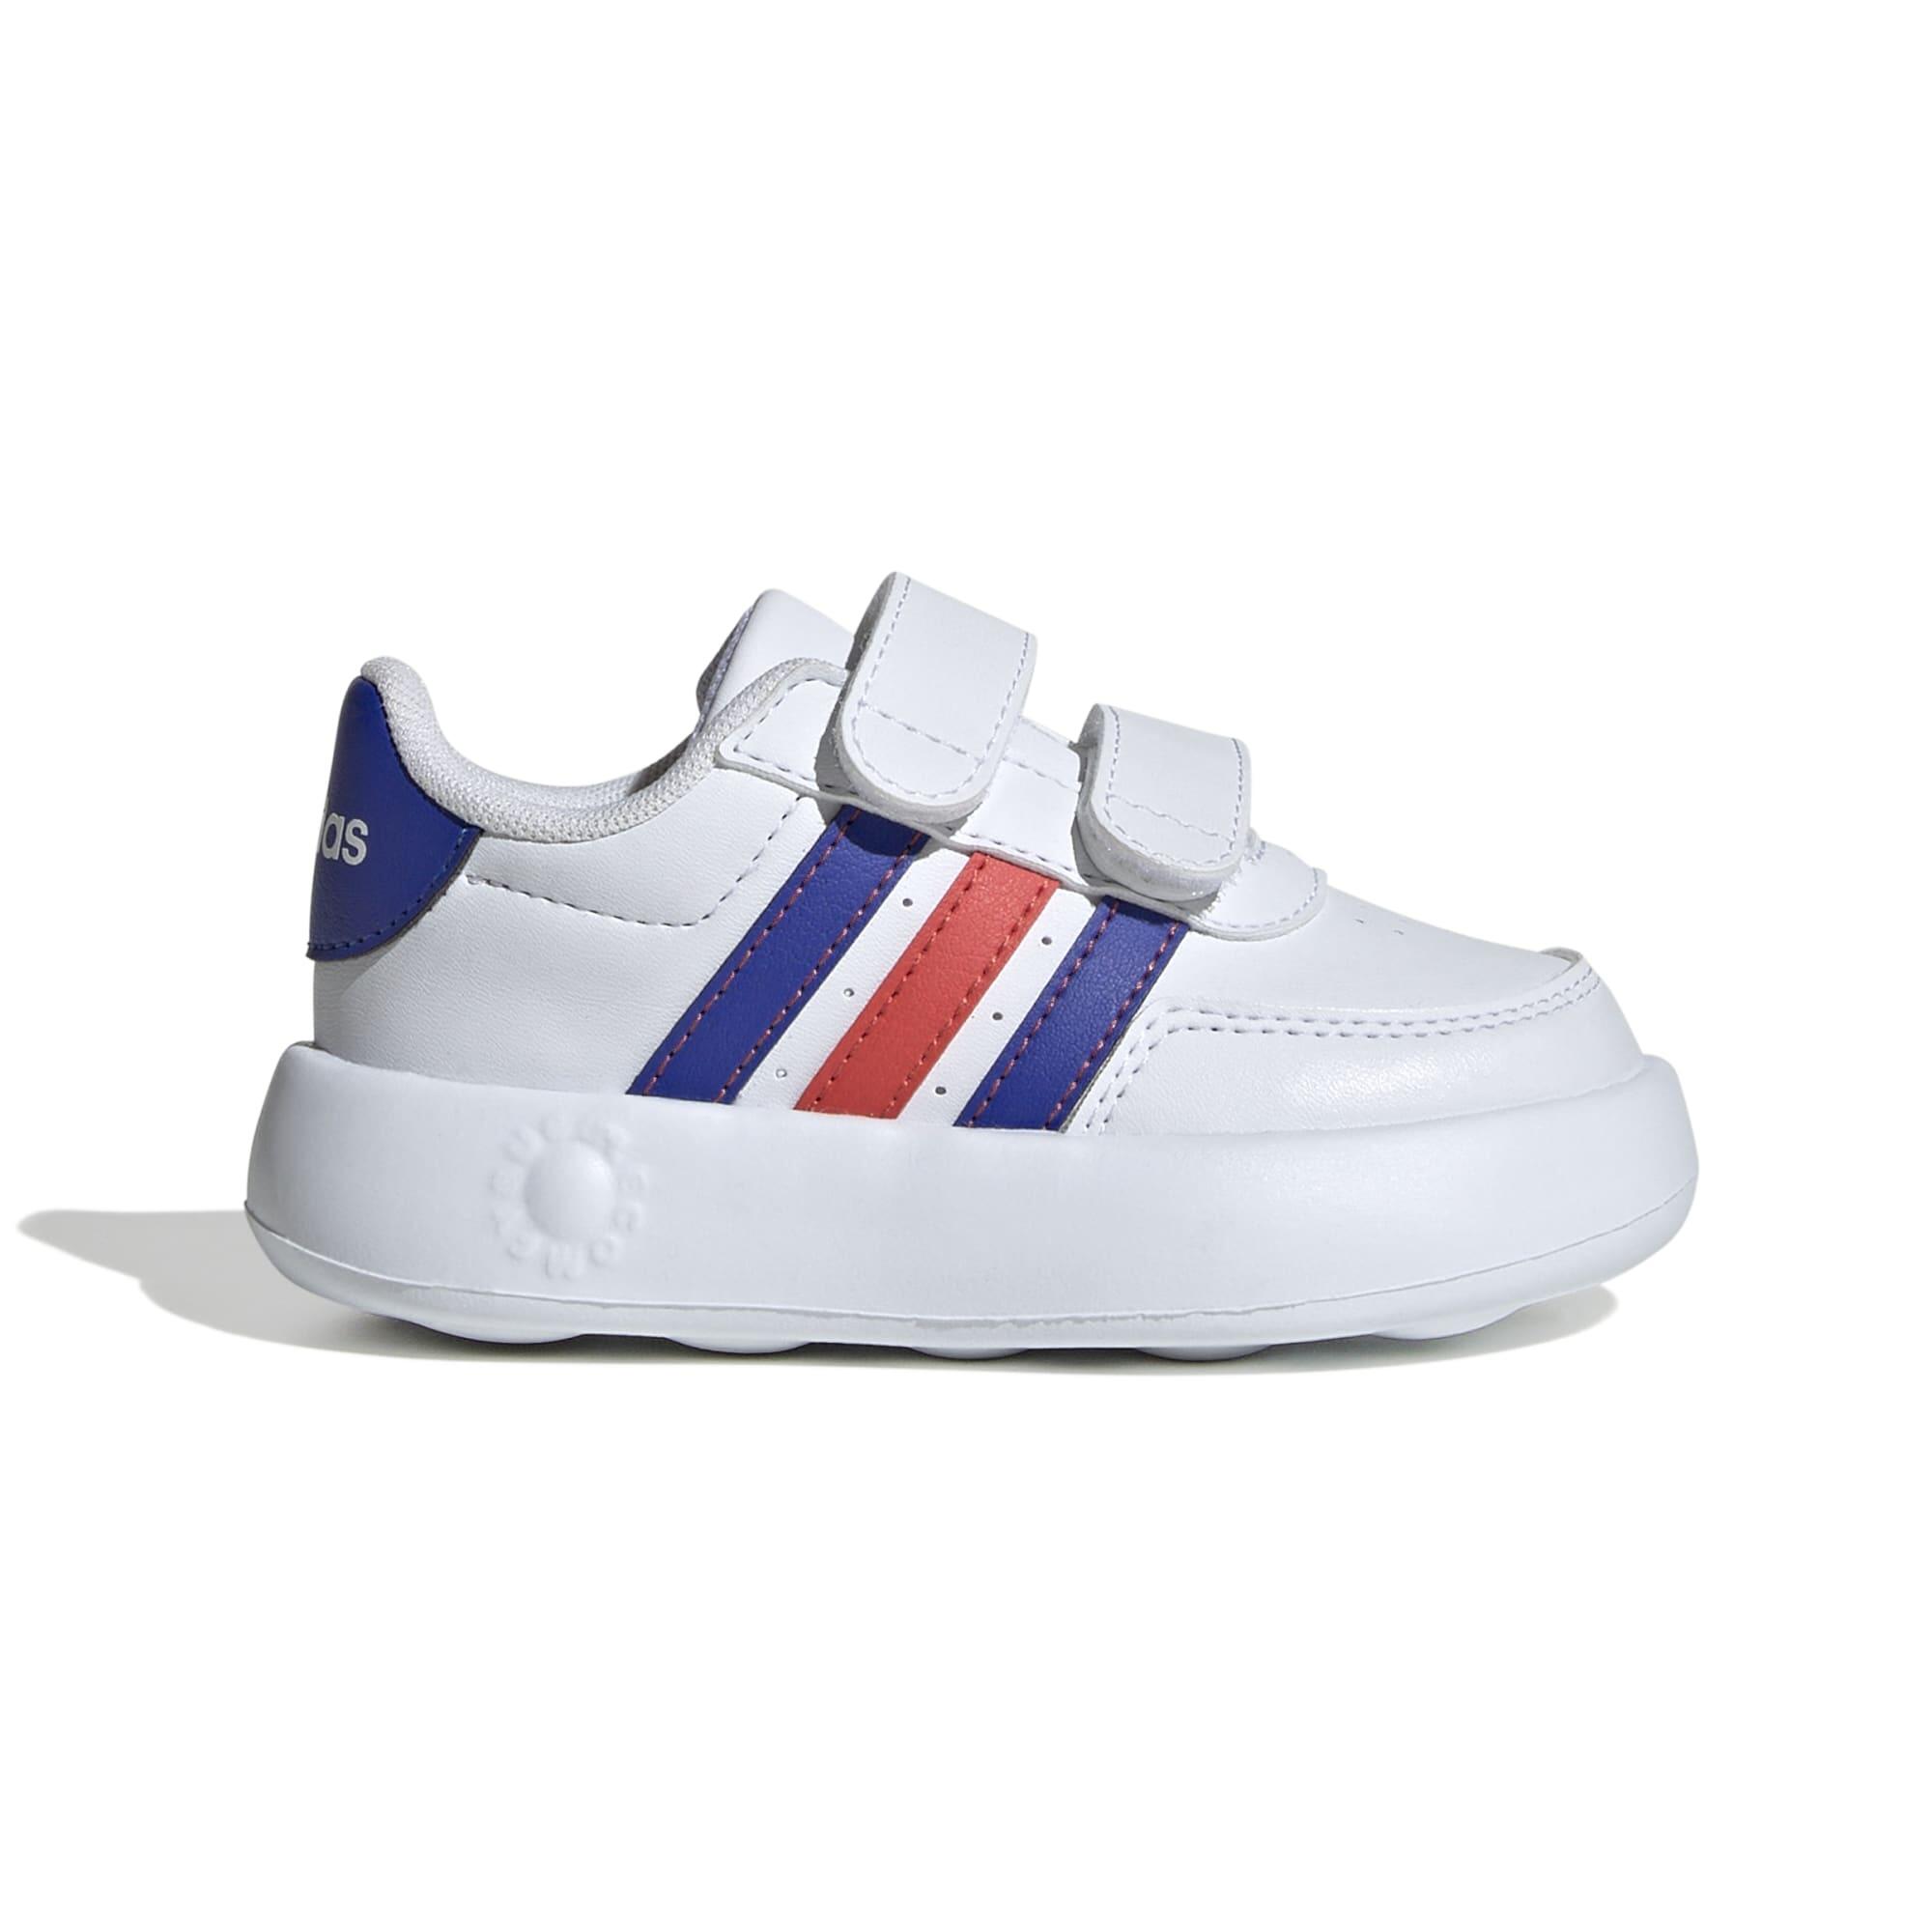 ADIDAS Kids' Shoes Breaknet - White / Blue / Red